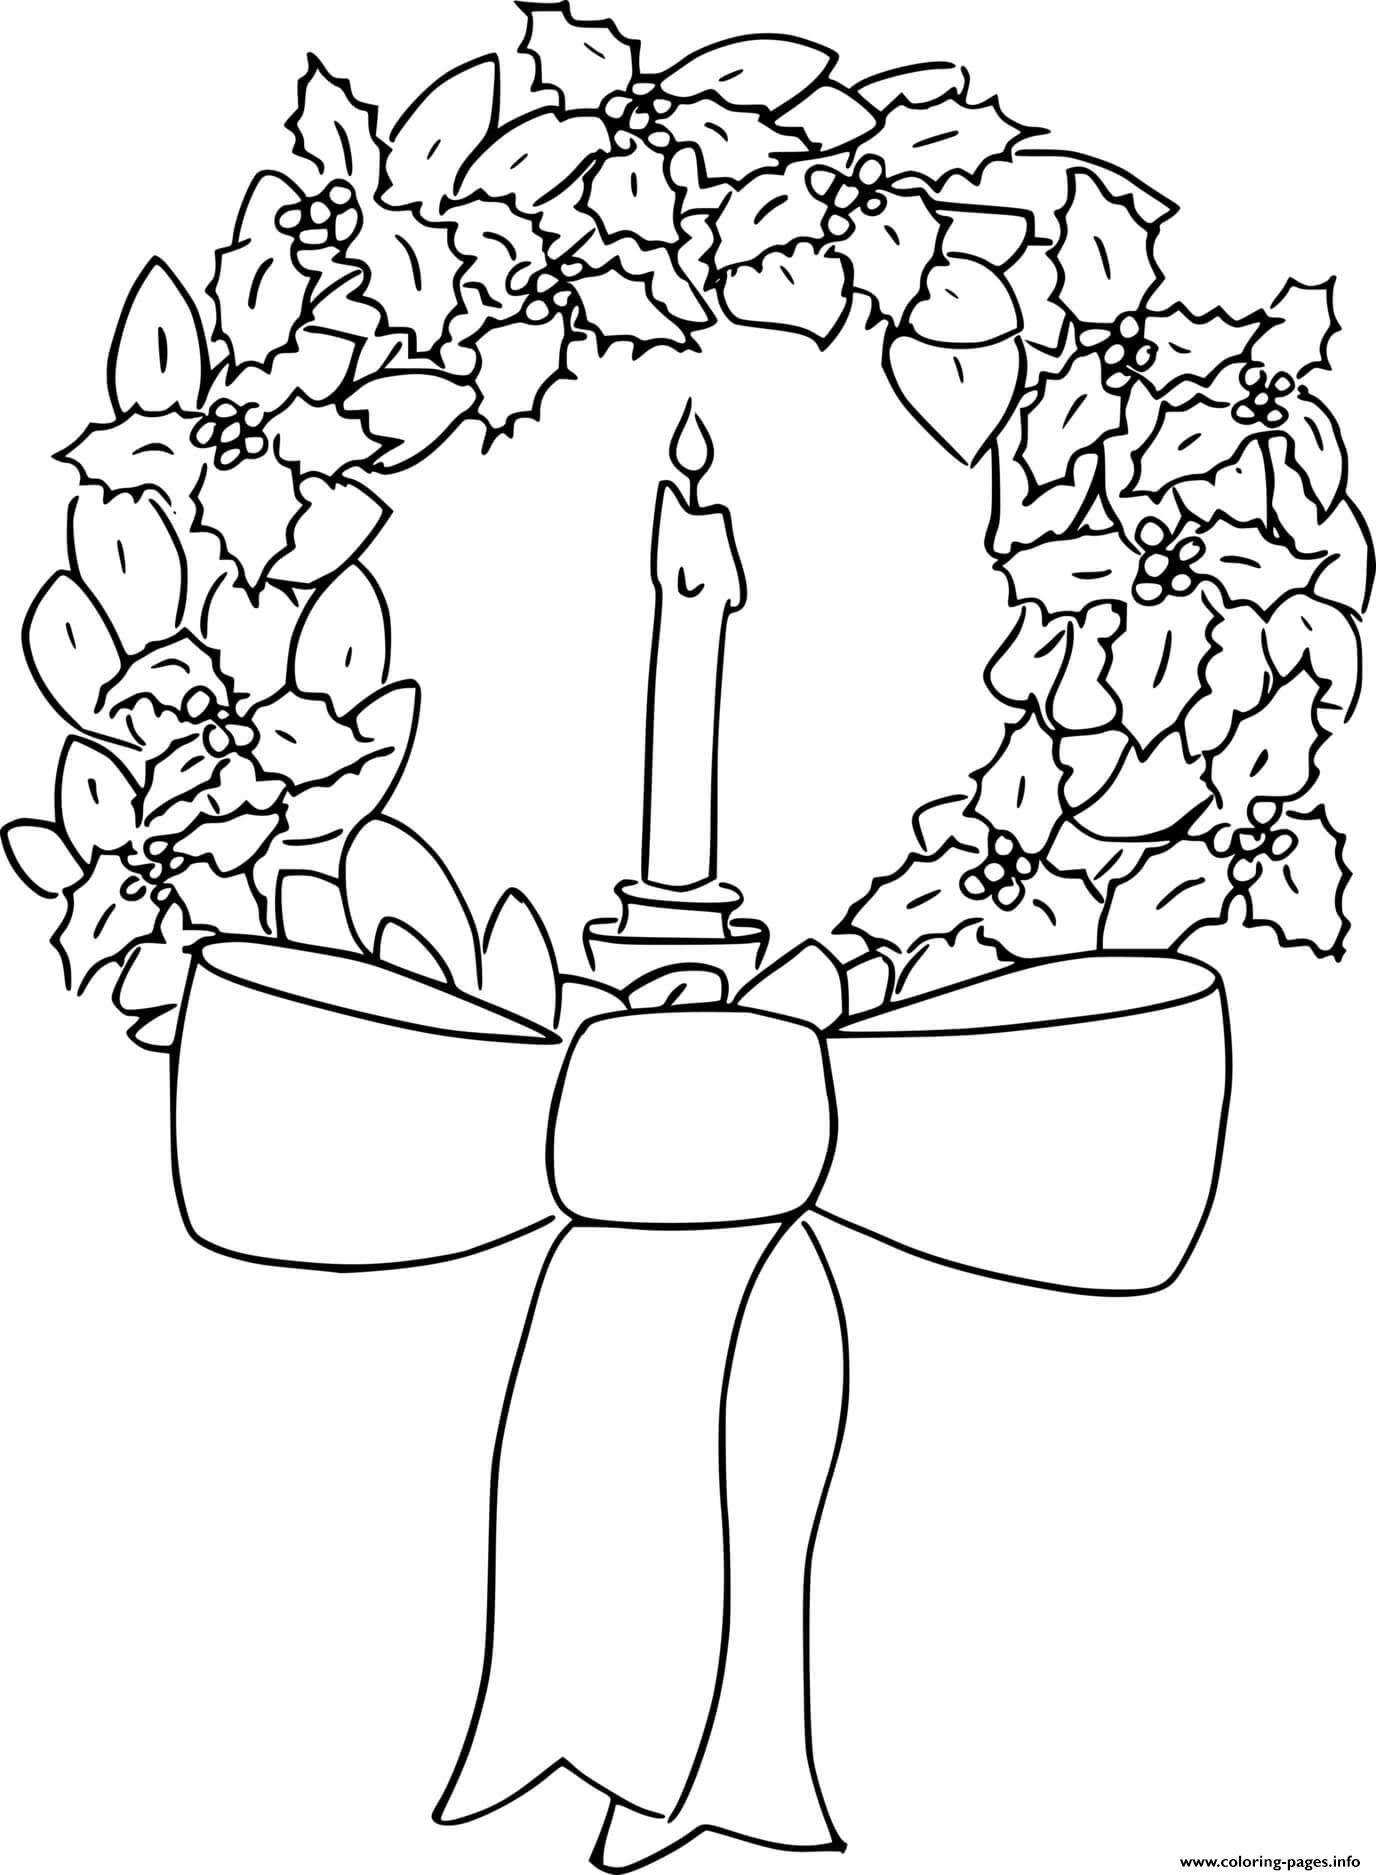 Poinsettia Wreath With A Candle coloring